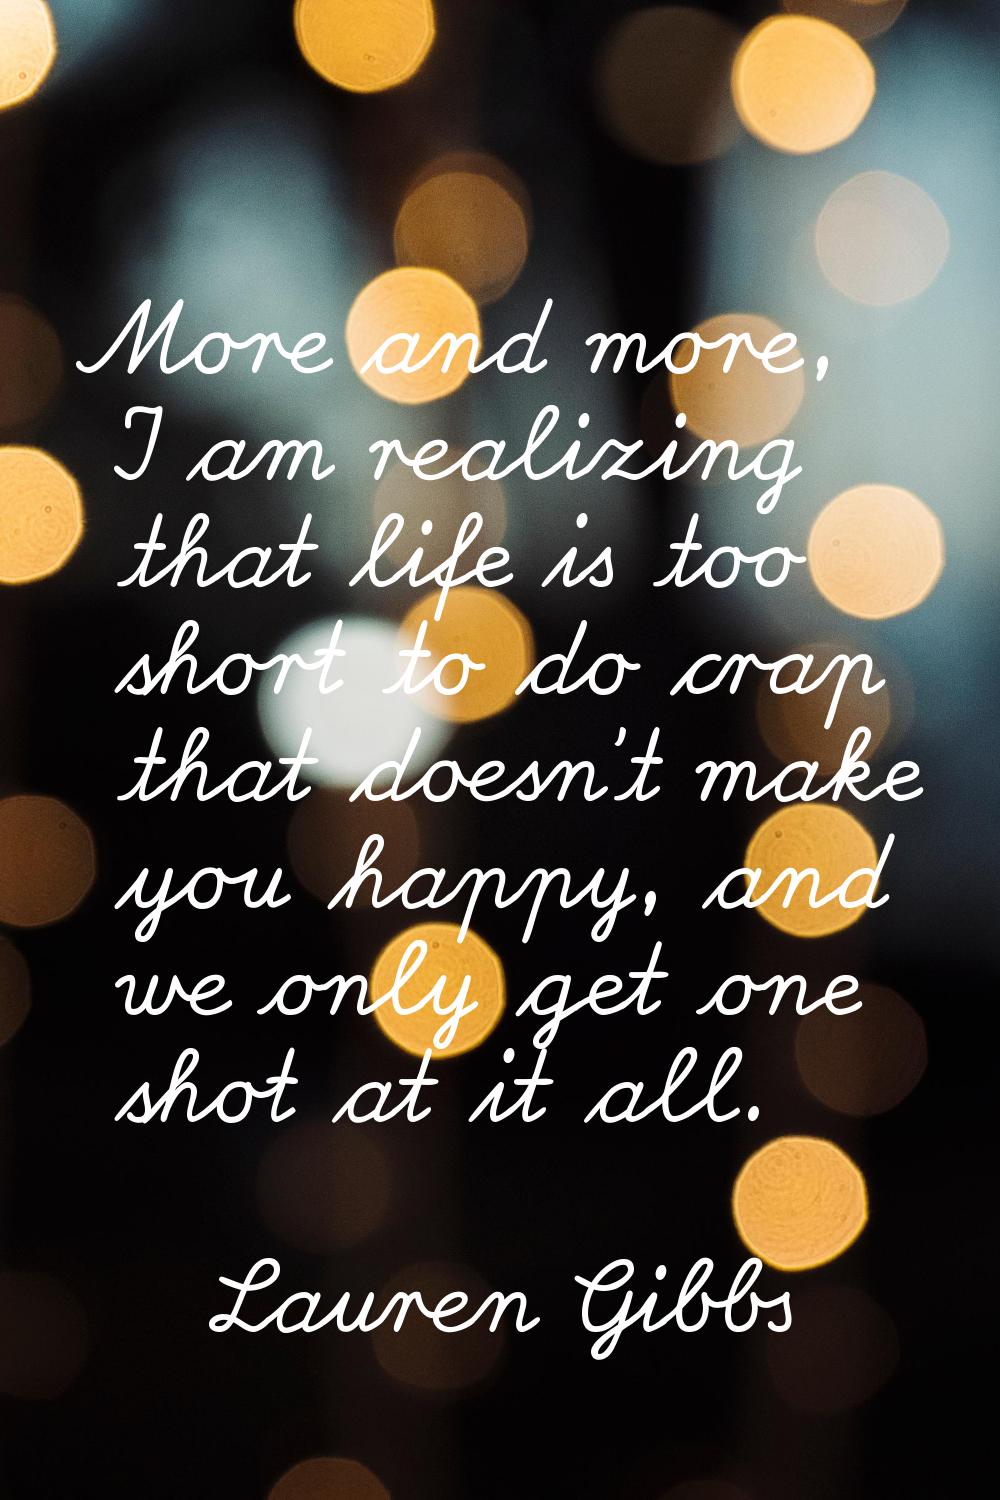 More and more, I am realizing that life is too short to do crap that doesn't make you happy, and we